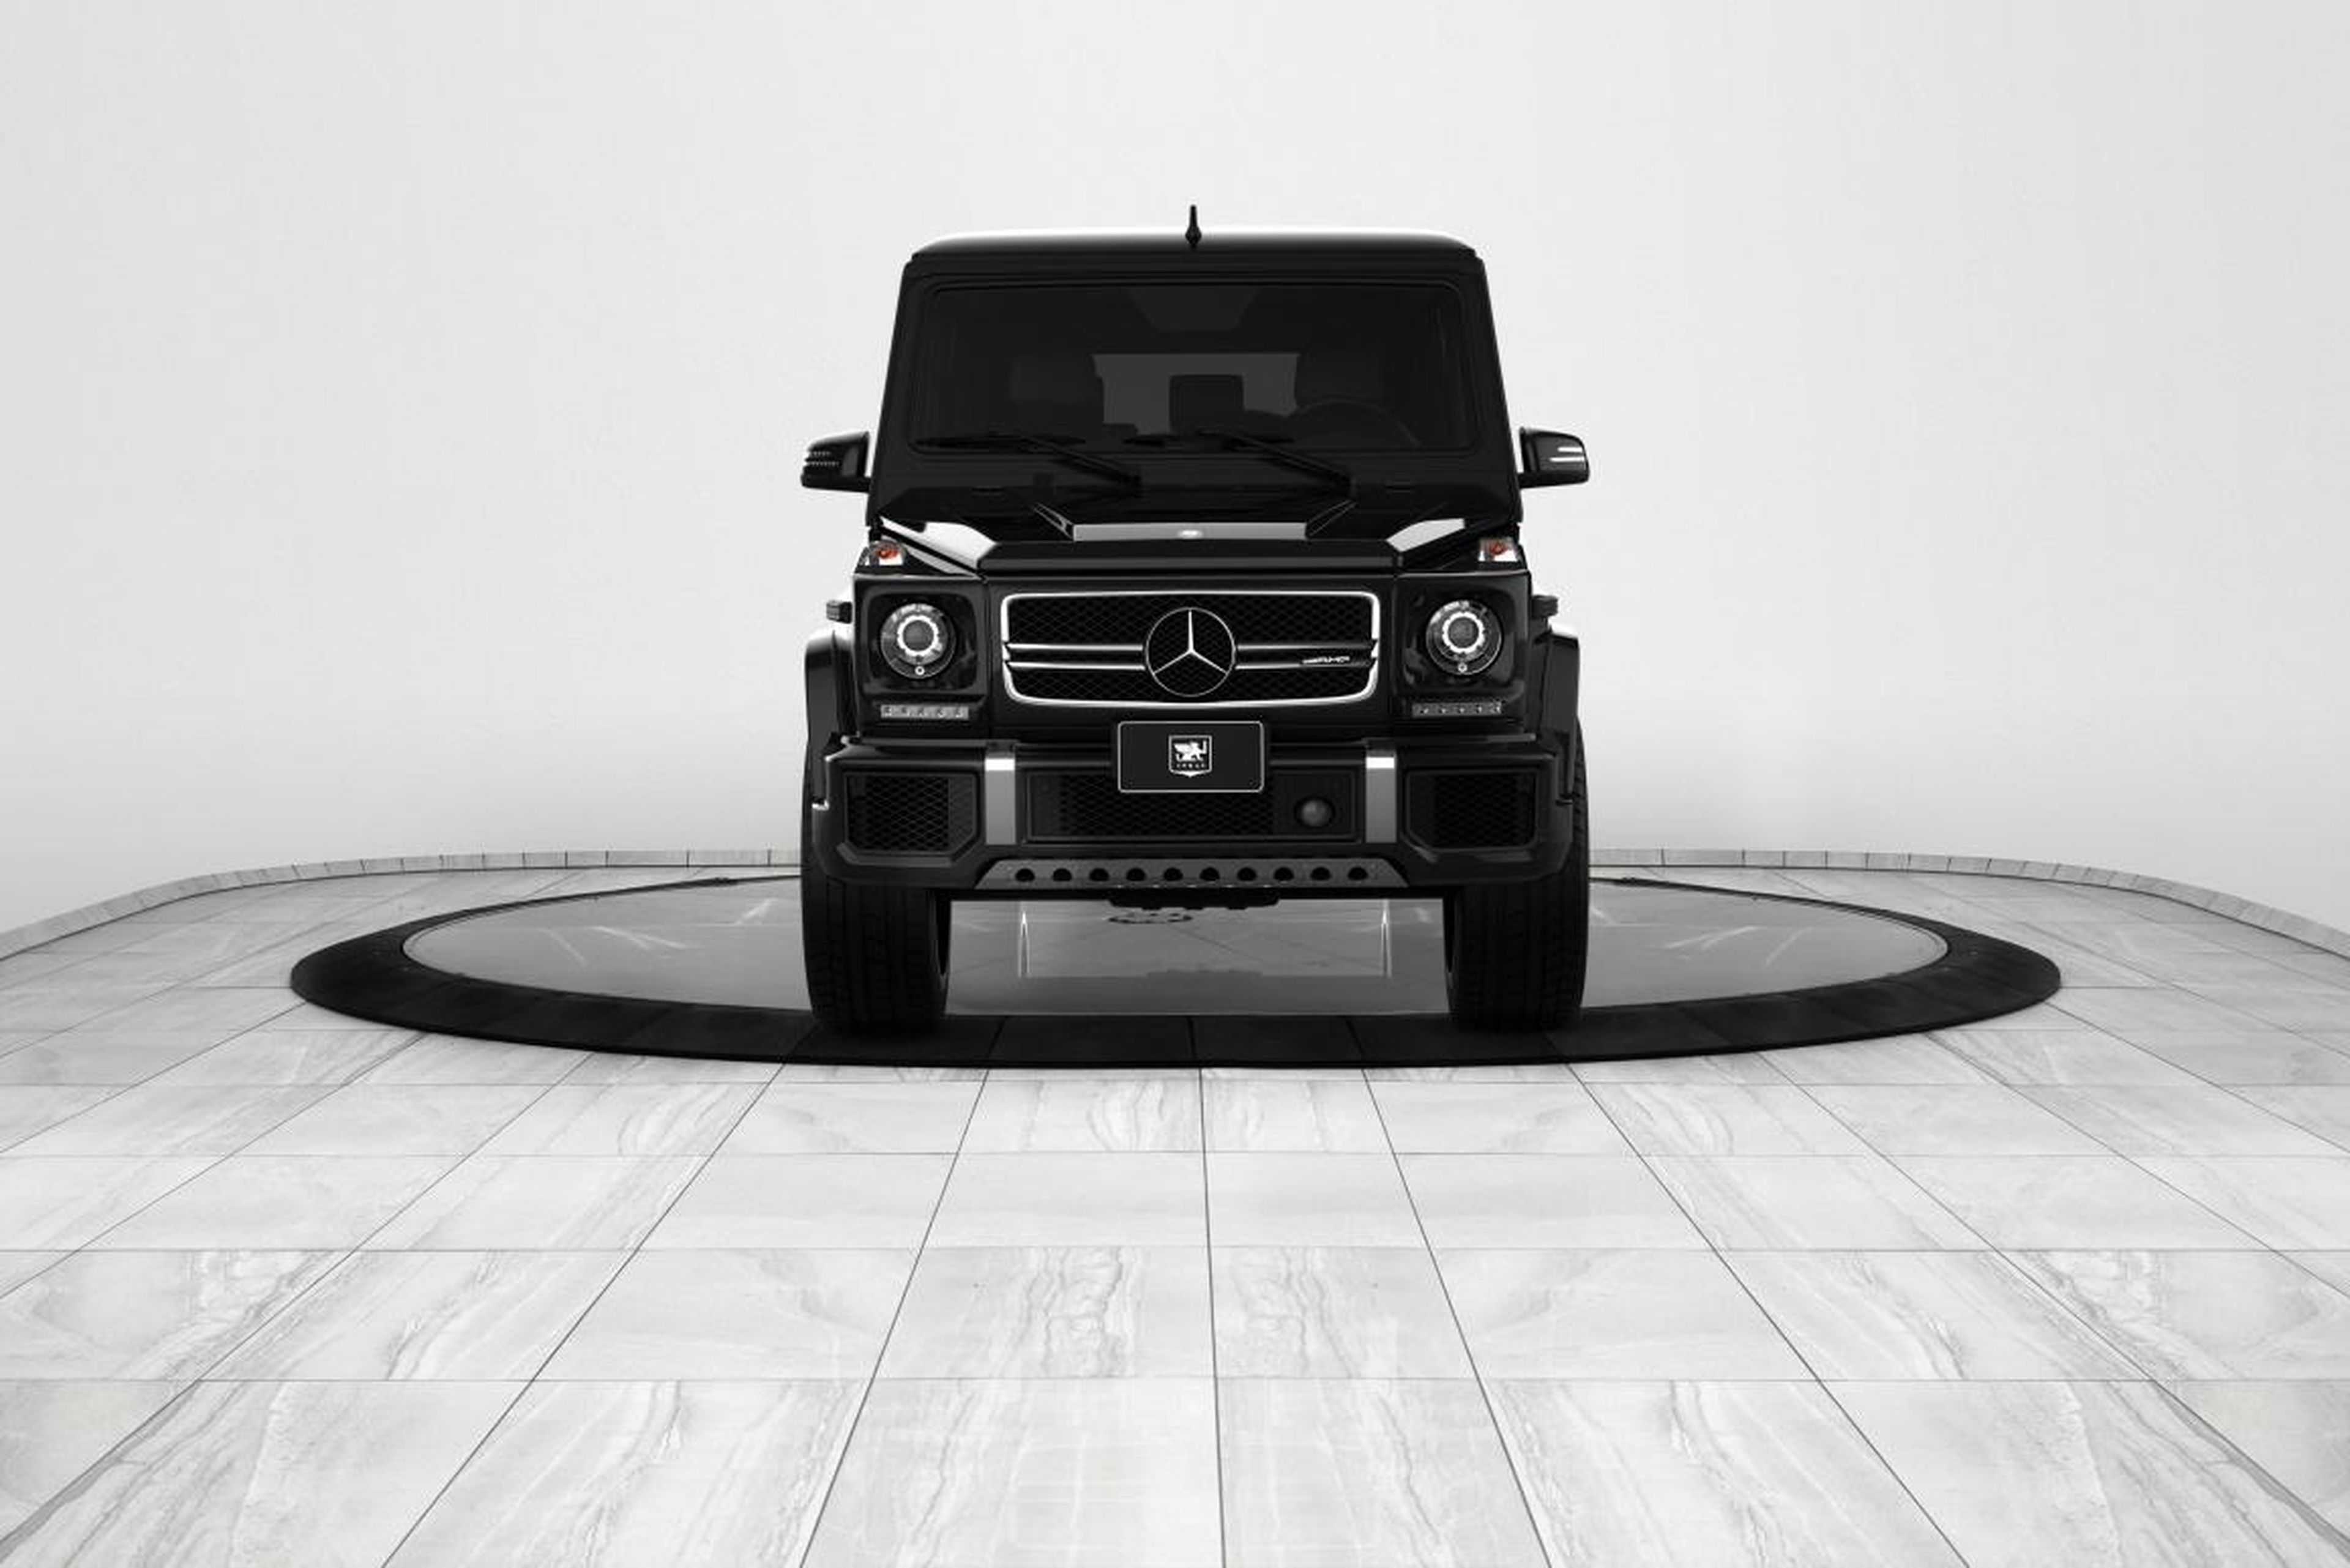 The 2018 Mercedes-Benz G63 AMG is listed at €1,000,000 euros or about $1.2 million USD. Yes, you read that correctly.